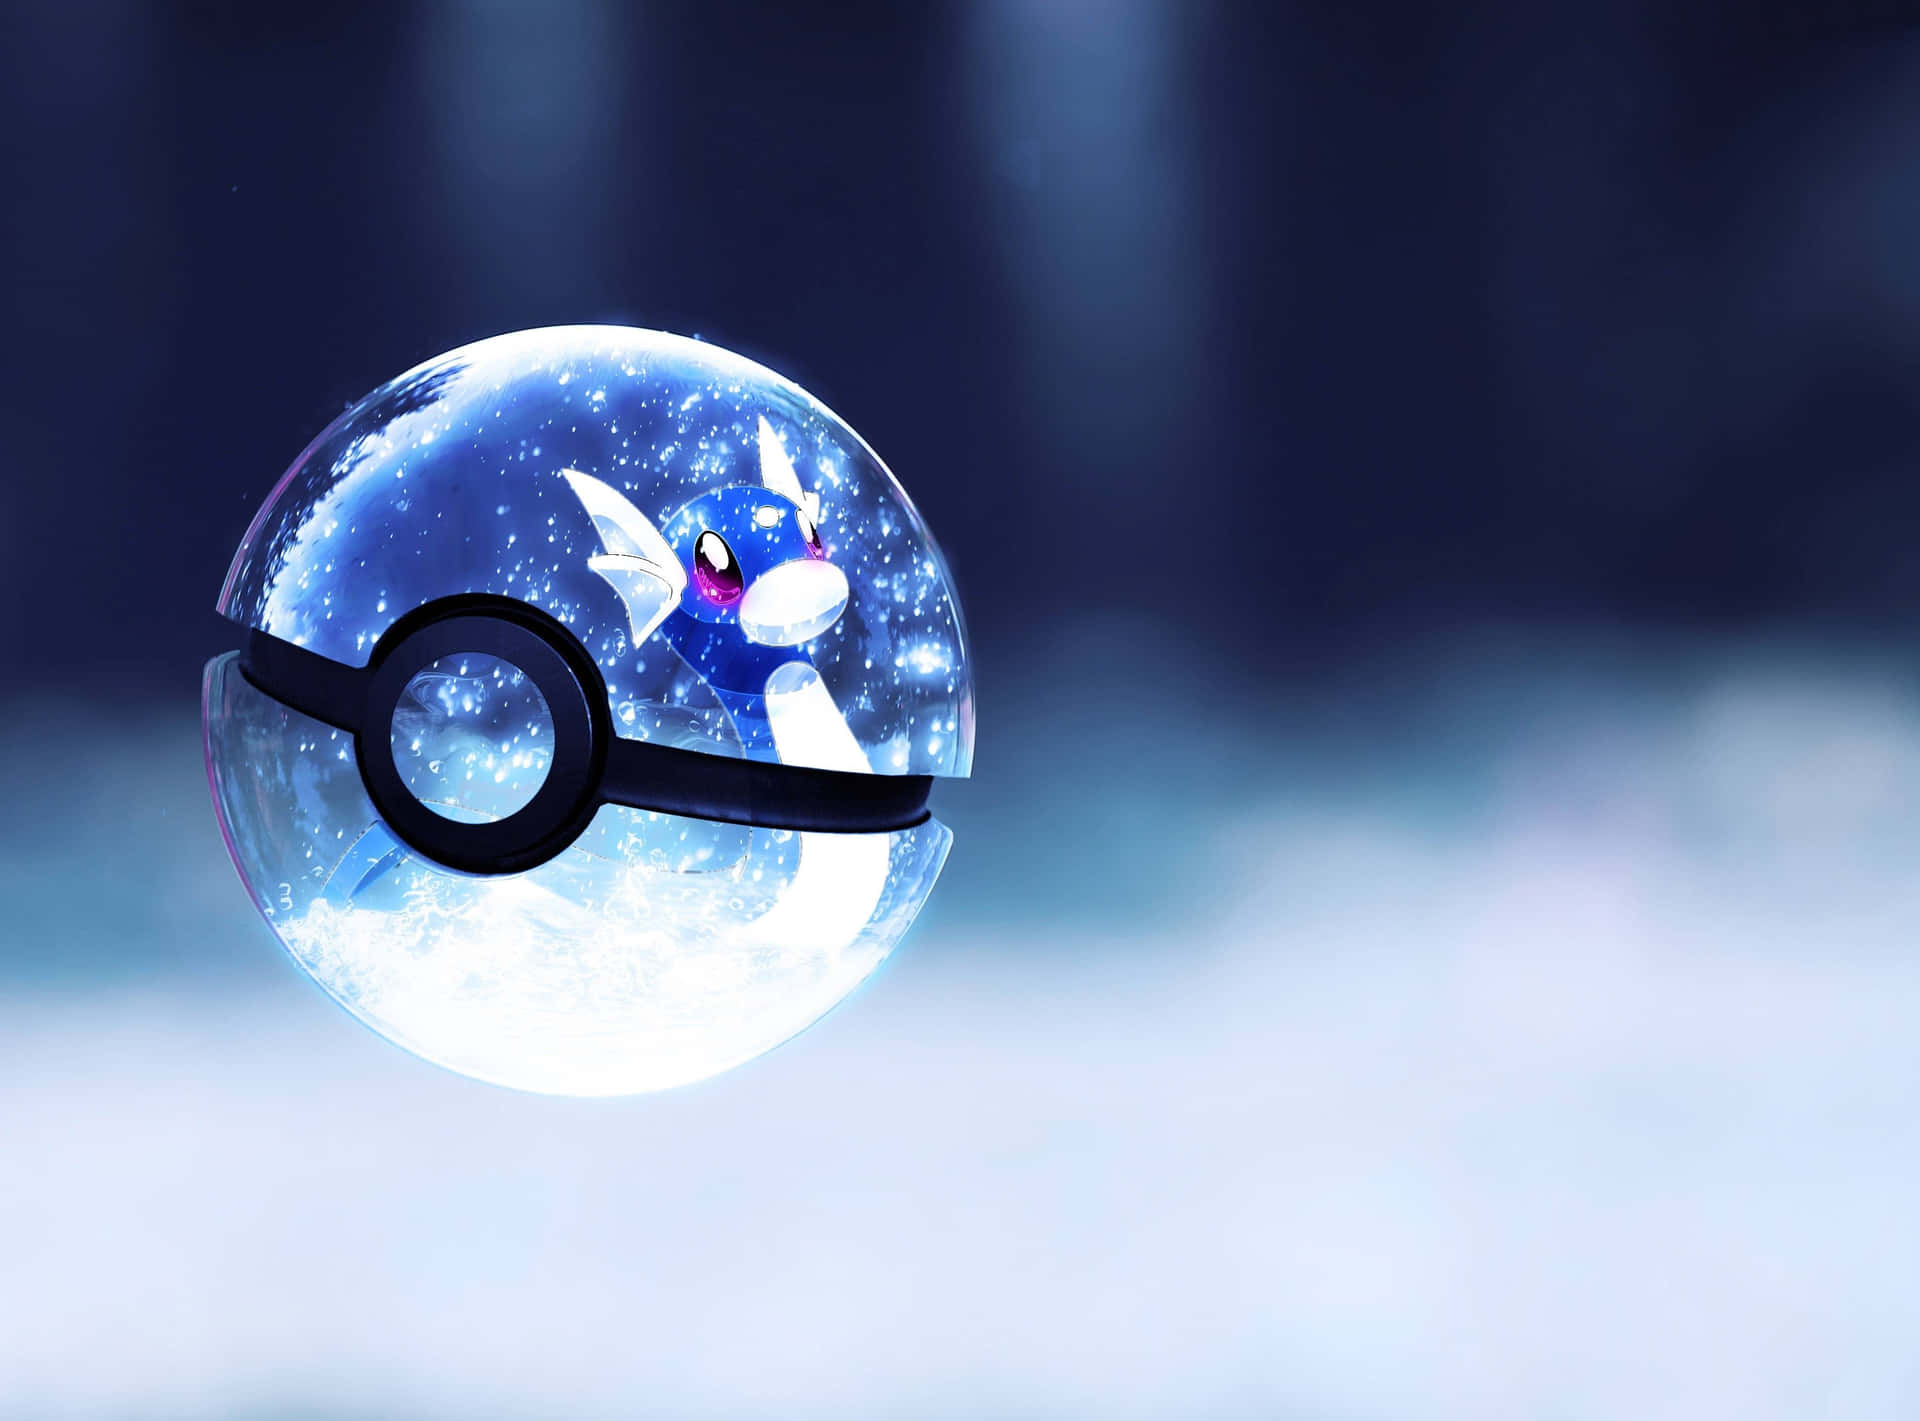 Set Out On An Adventure With Pokemon Go! Wallpaper